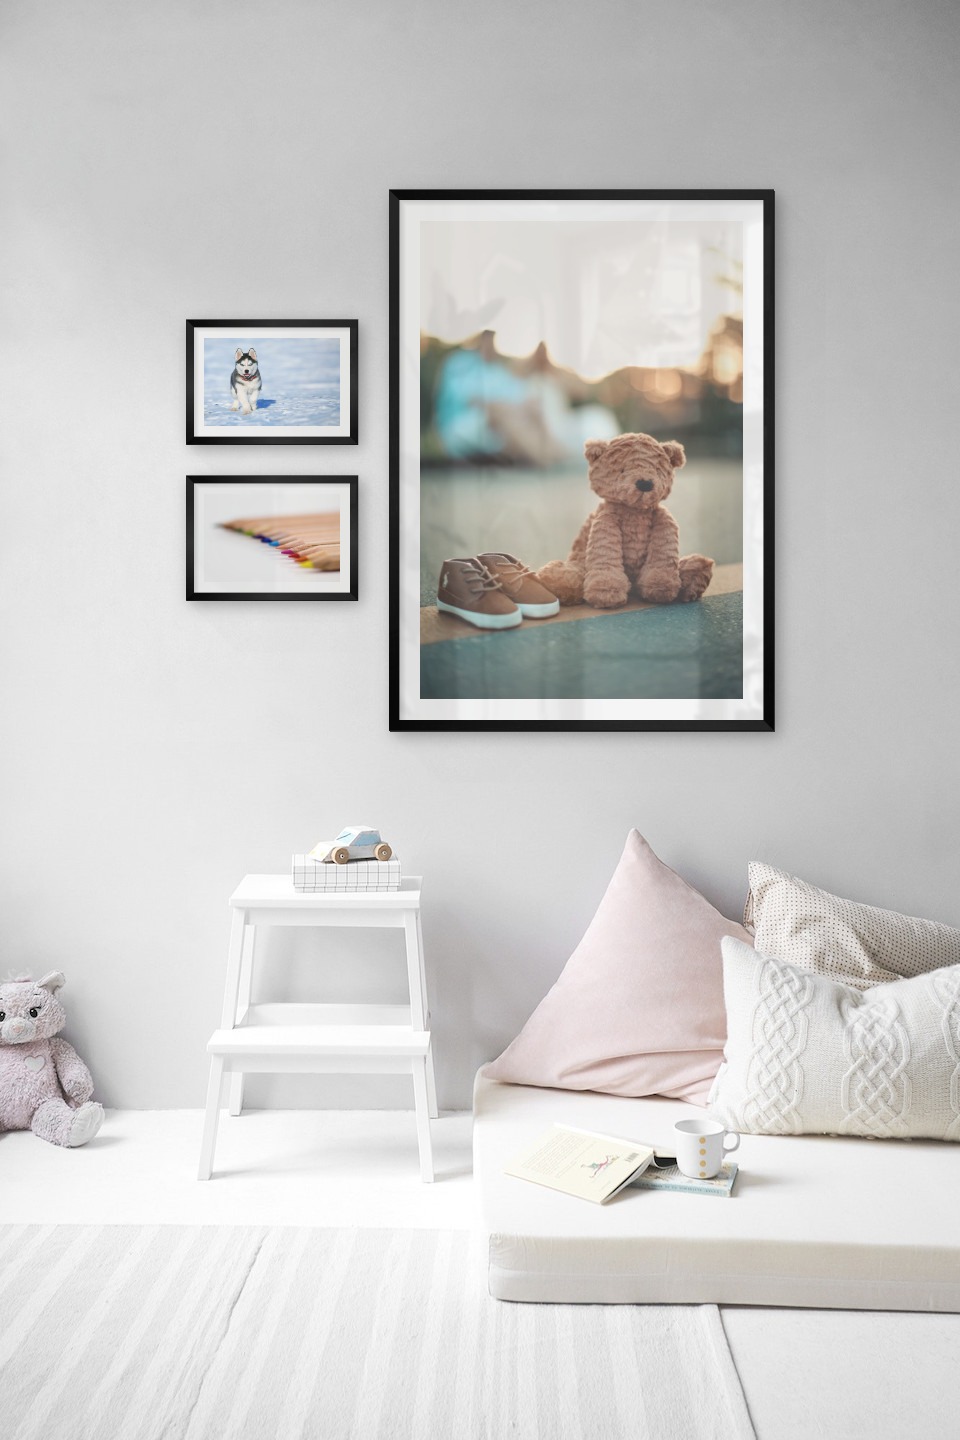 Gallery wall with picture frames in black in sizes 21x30 and 70x100 with prints "Husky", "Pencils in different colors" and "Teddy bear on the street"